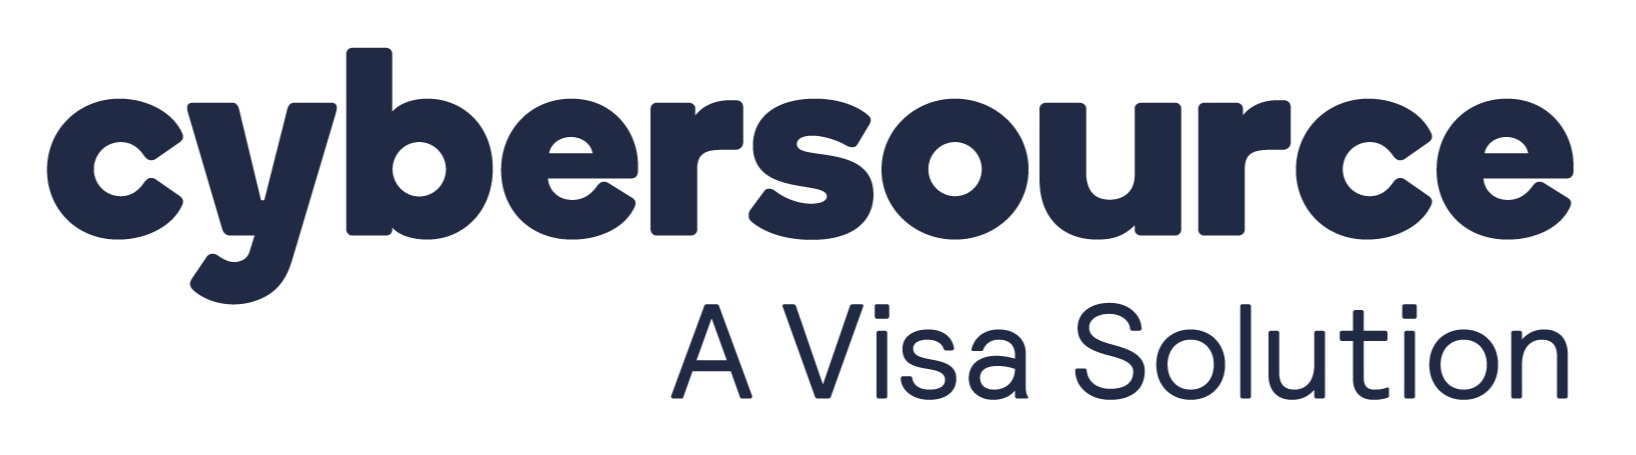 CyberSource, a Visa Solution